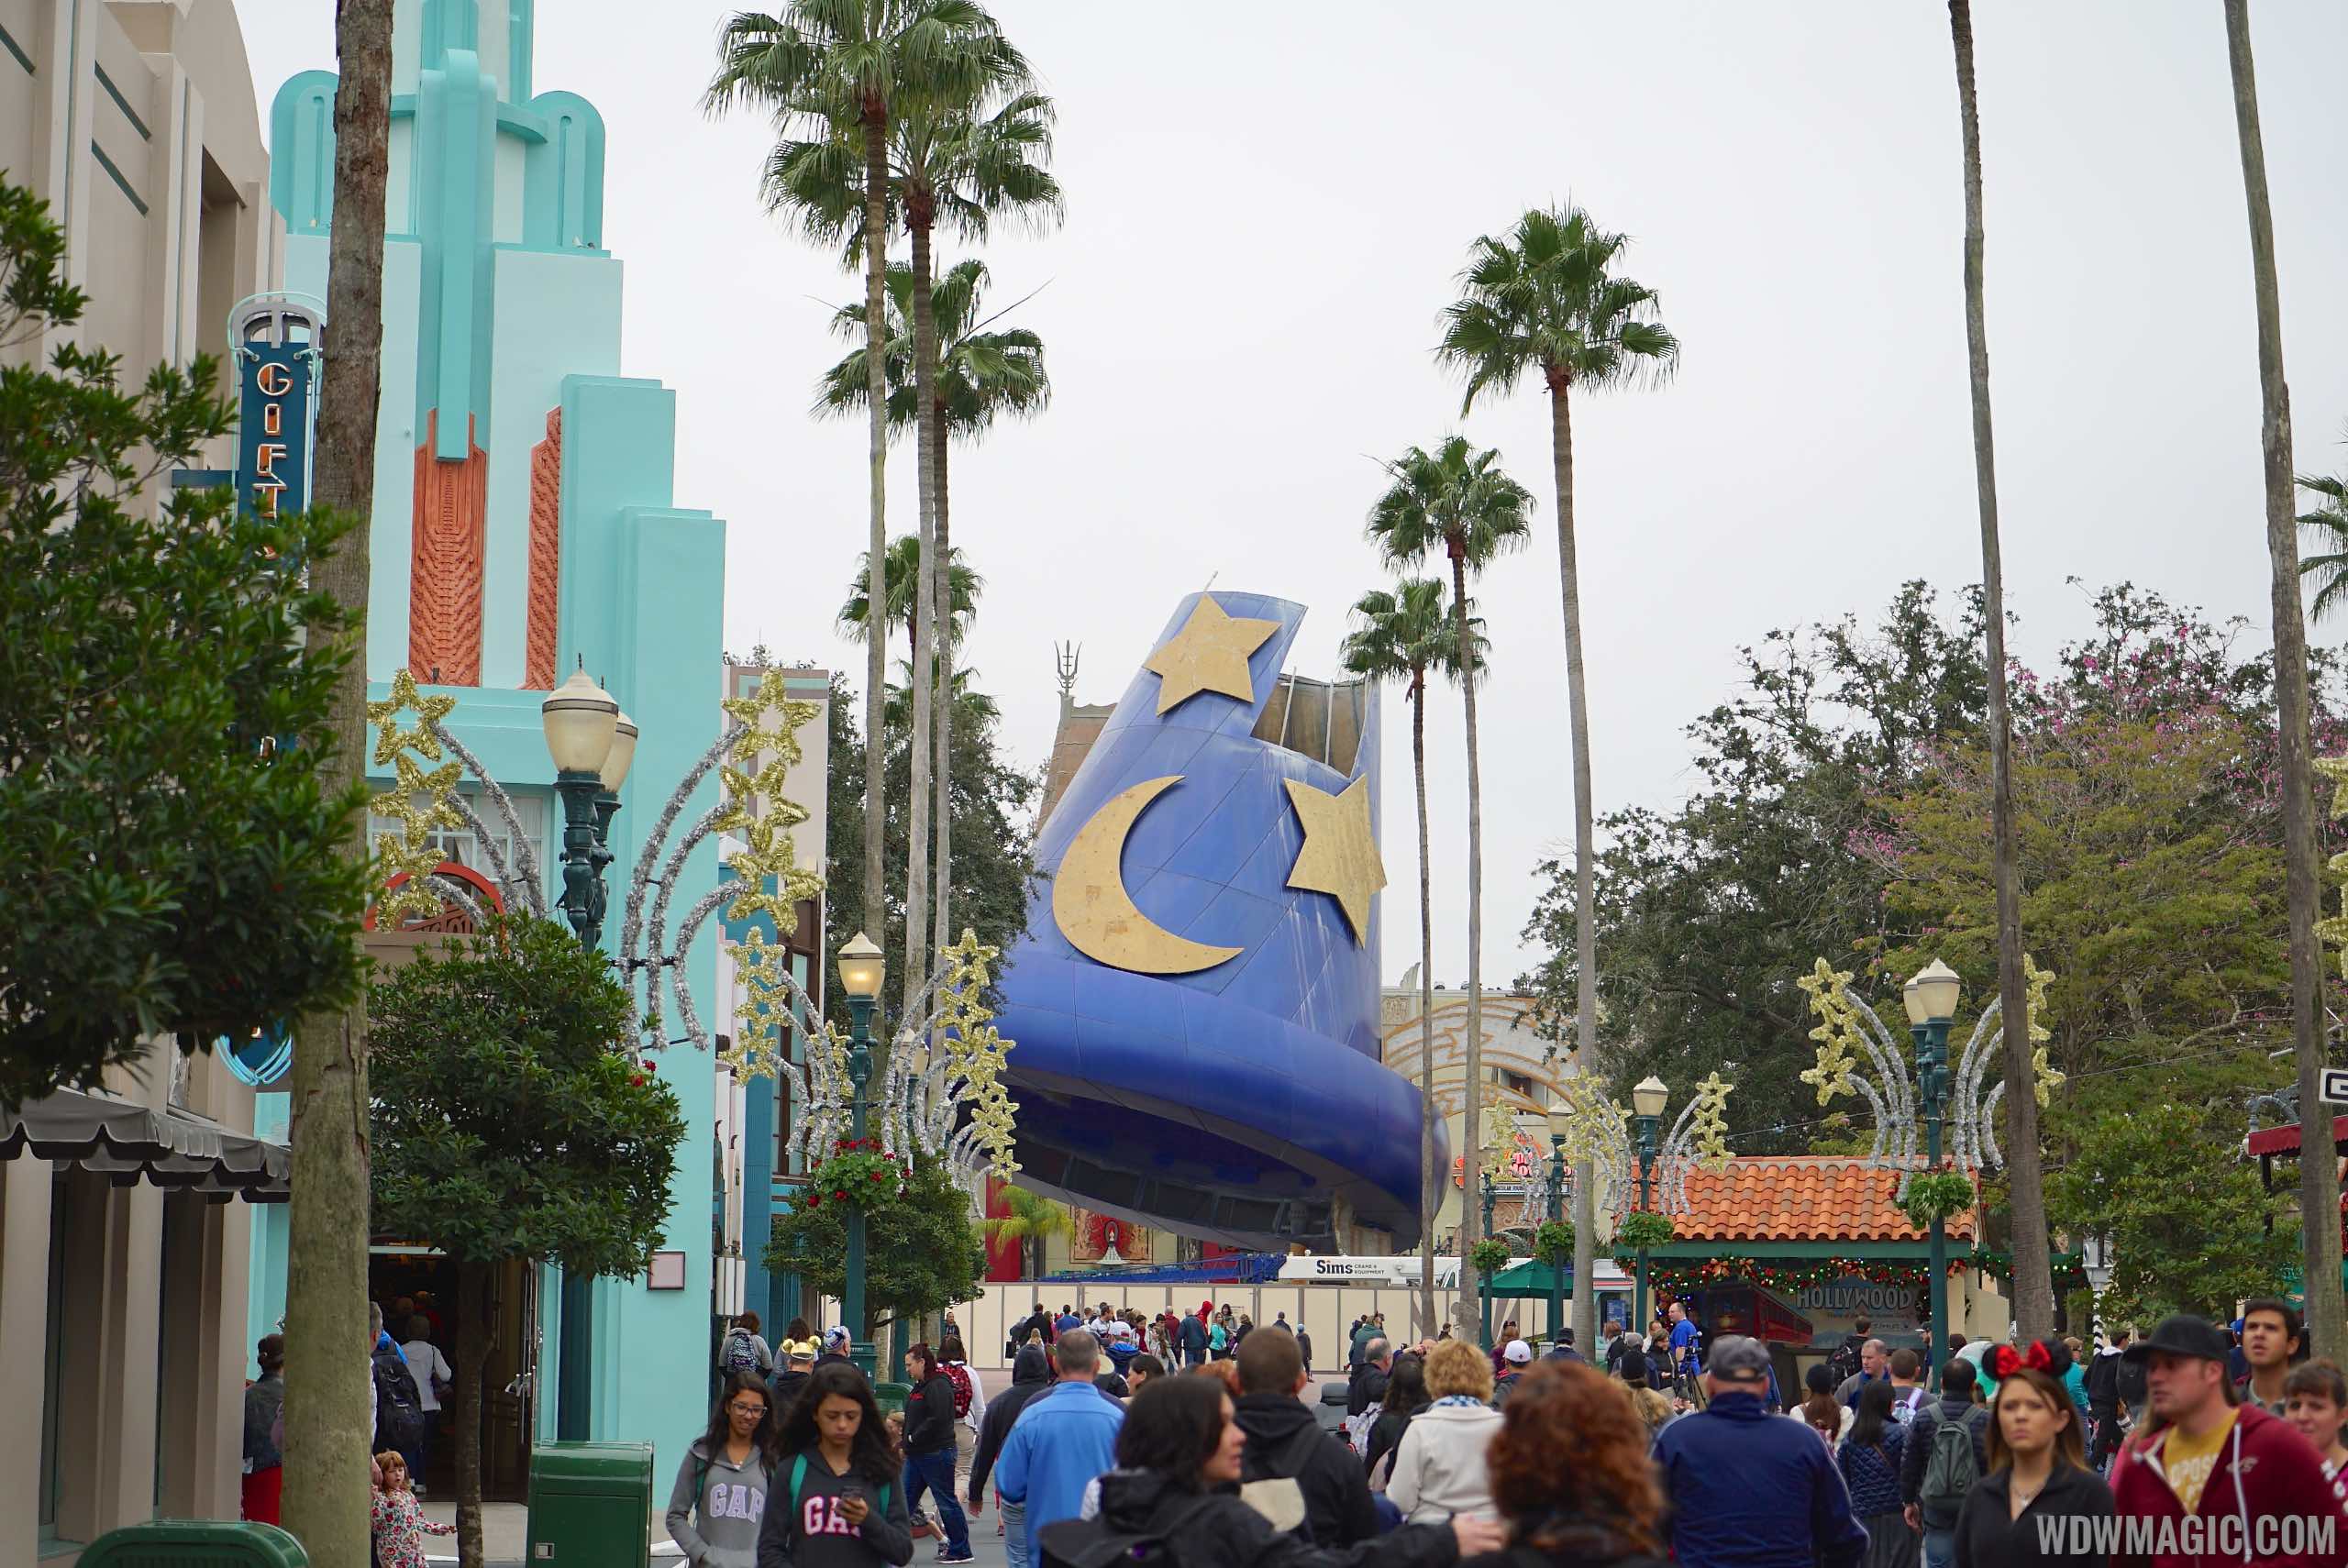 PHOTOS - Latest look at the Sorcerer Mickey Hat icon demolition at